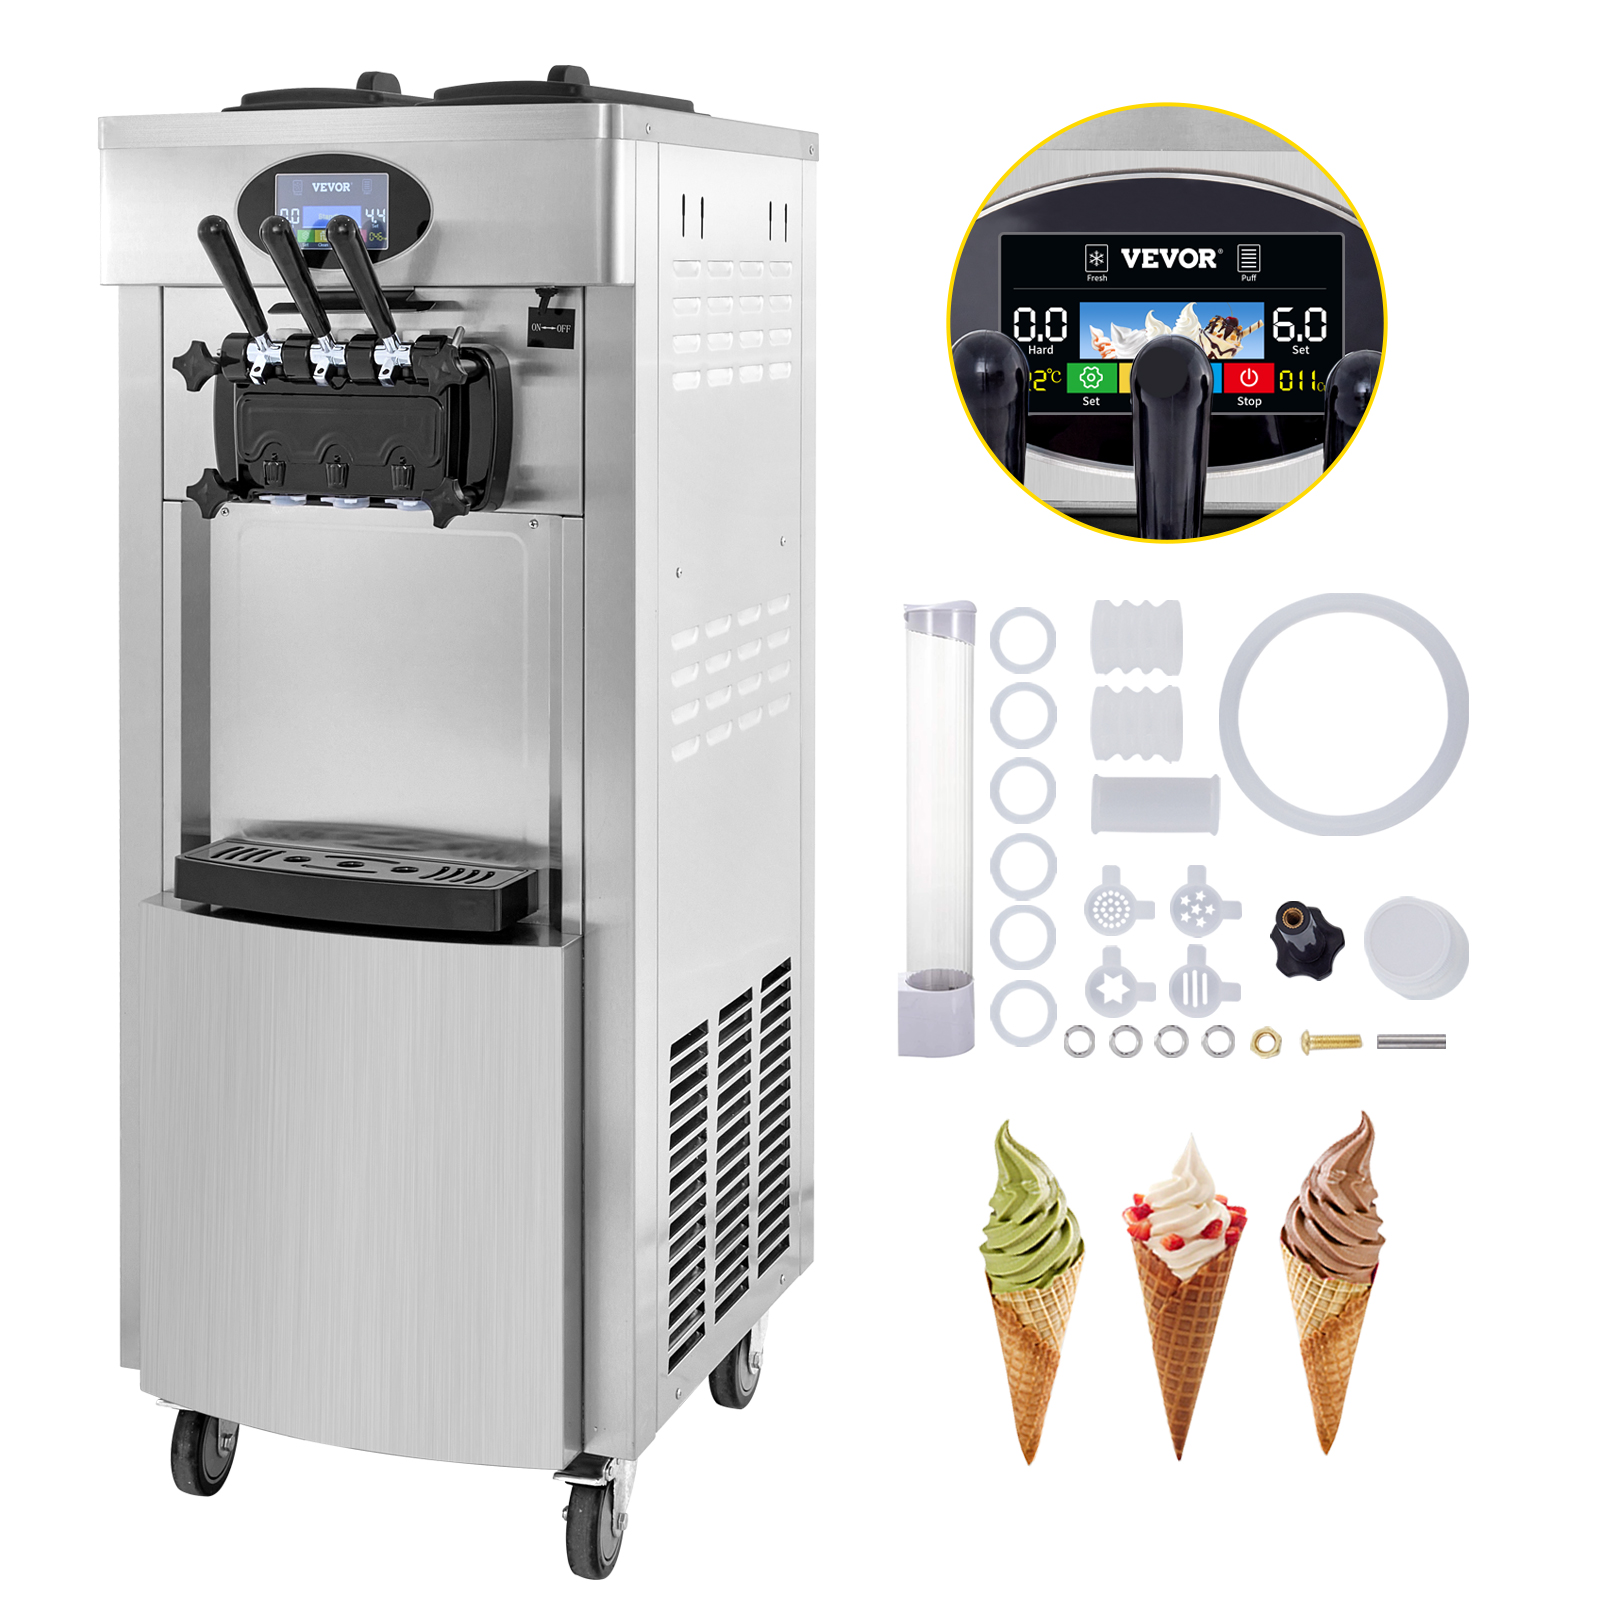 VEVOR 2200W Commercial Soft Ice Cream Machine 3 Flavors 5.3 to 7.4Gallon per Hour PreCooling at Night Auto Clean LCD Panel от Vevor Many GEOs